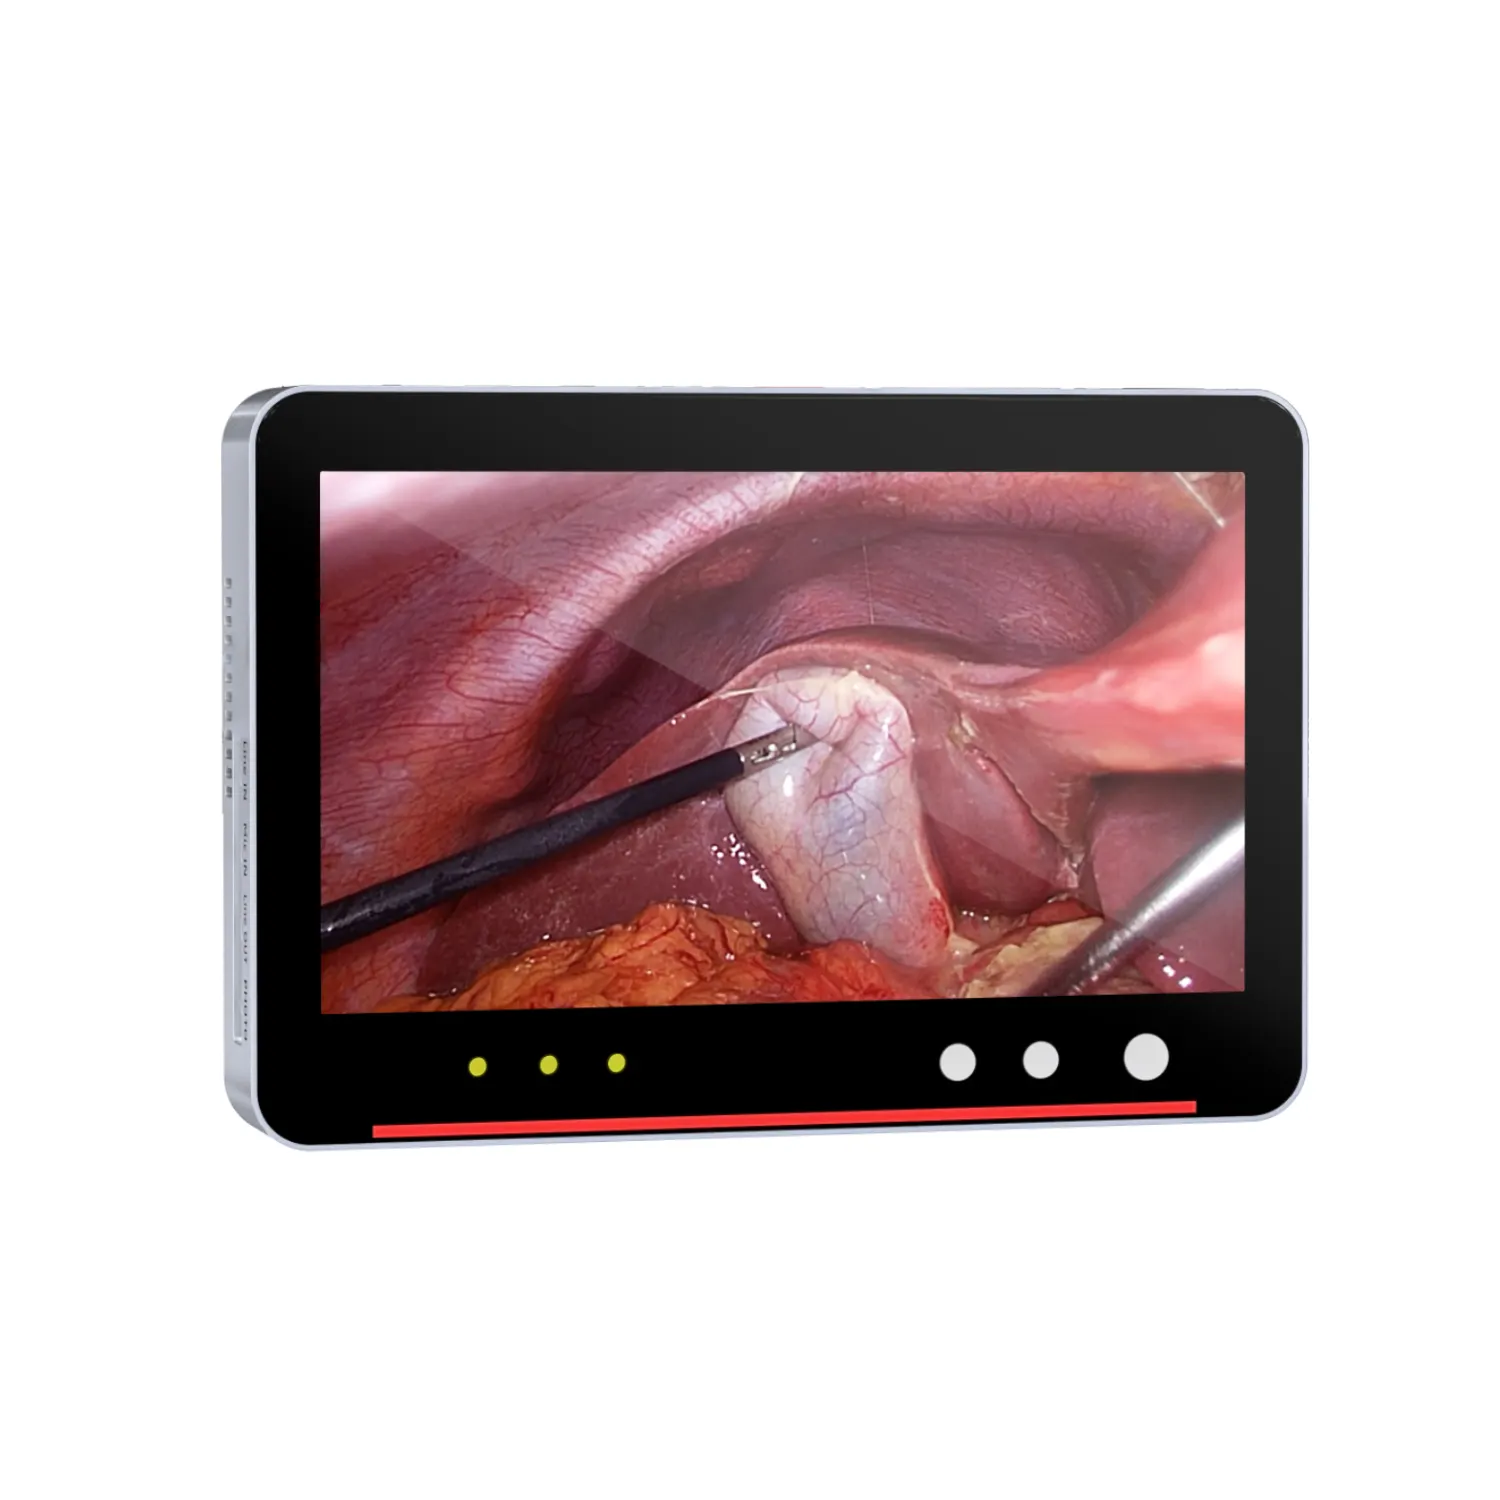 Unisheen Full HD Medical Endoscope Camera System With 80W LED Light Source And USB Video Recorder with battery holder